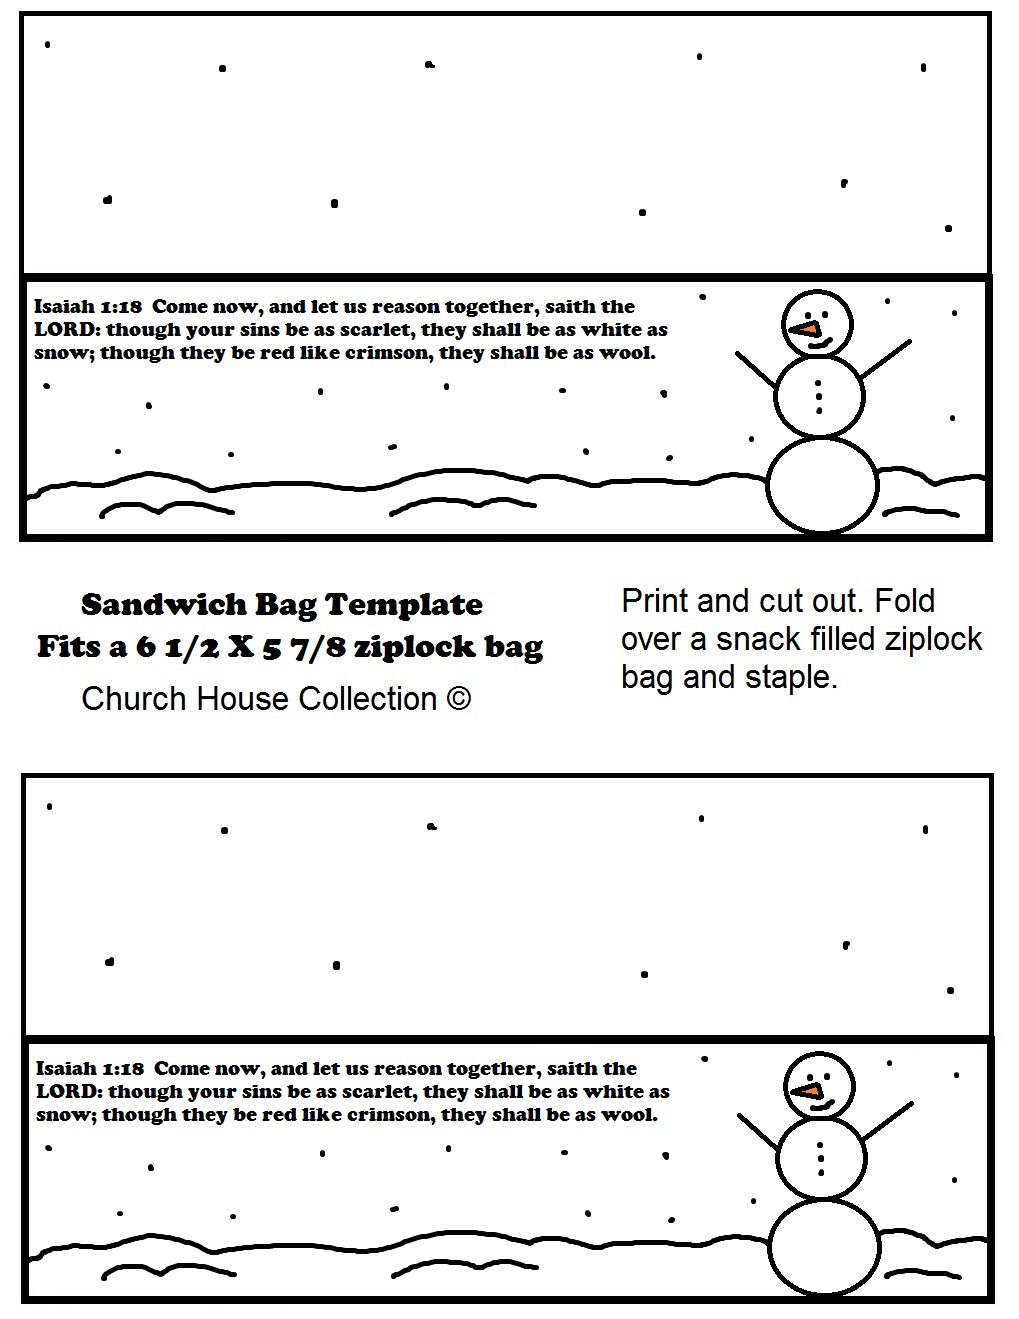 Free Christmas Printable Template Snowman Sandwich Bag Template by Church House Collection. Use with Free Christmas Sunday School Lessons. Have kids cut them out and staple over a ziplock bag filled with snacks.